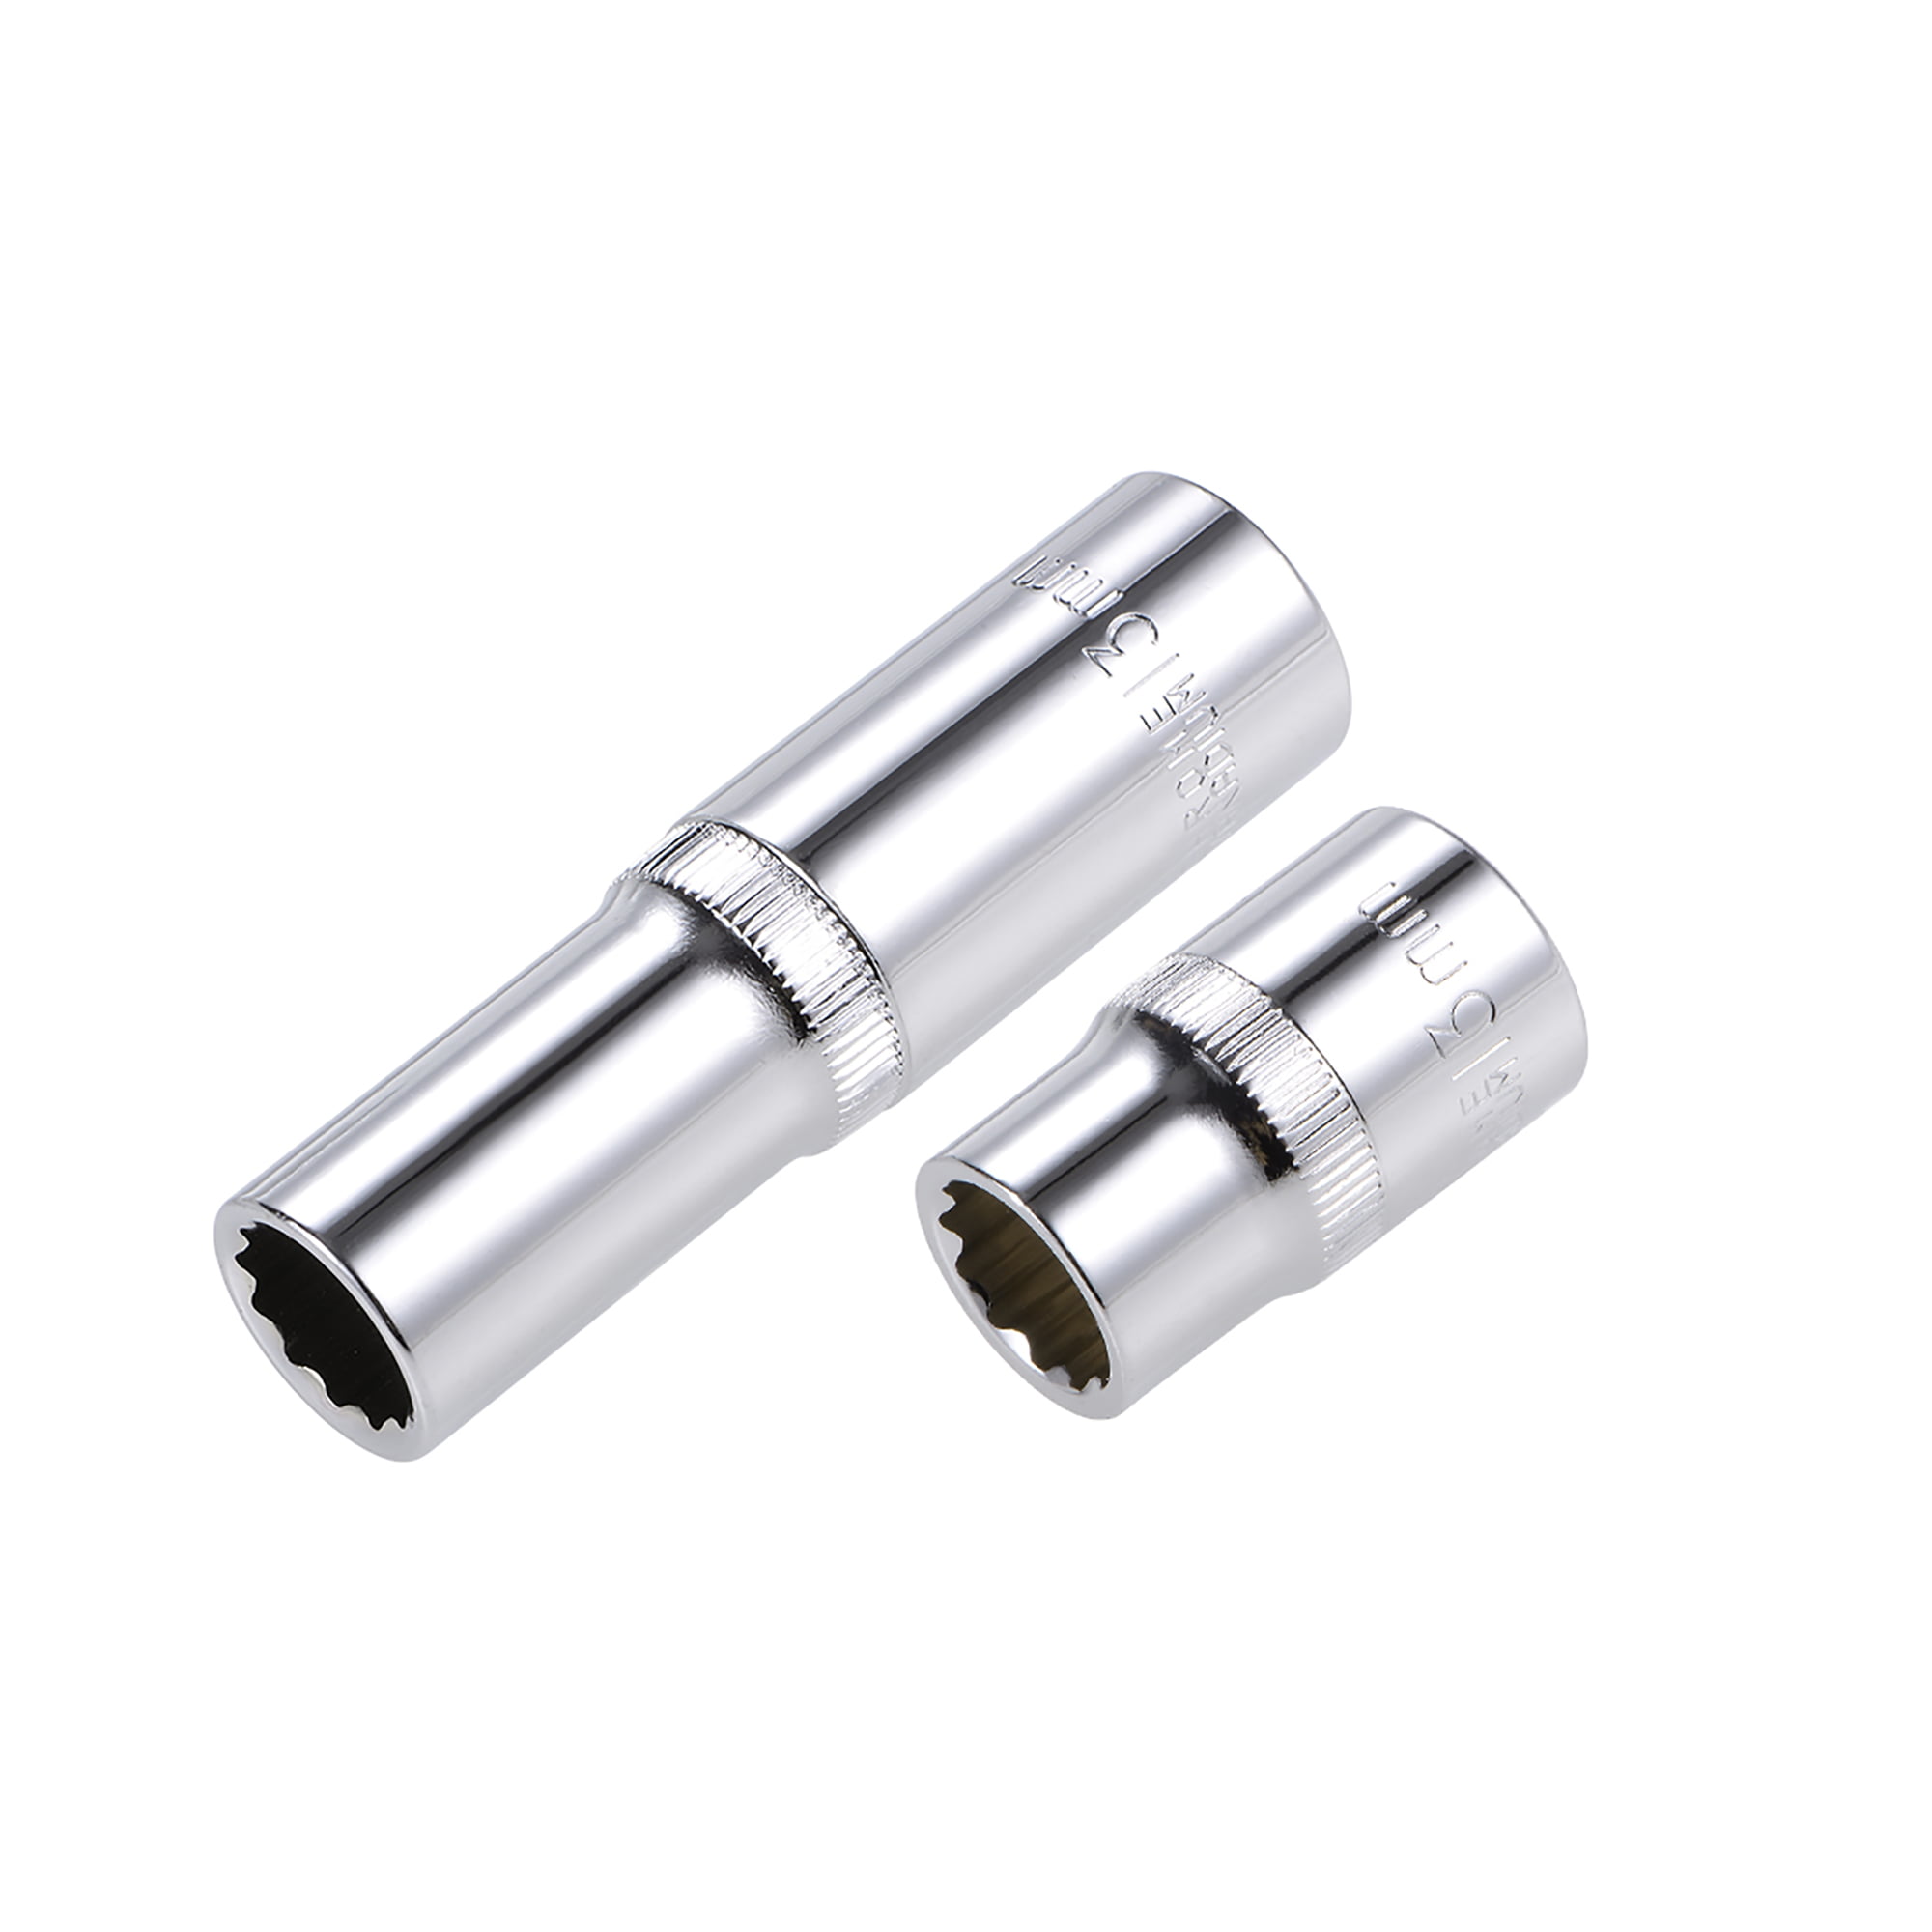 uxcell 1/2-Inch by 1/2-Inch 6-Point Impact Socket CR-V Steel 38mm Length Shallow SAE Sizes